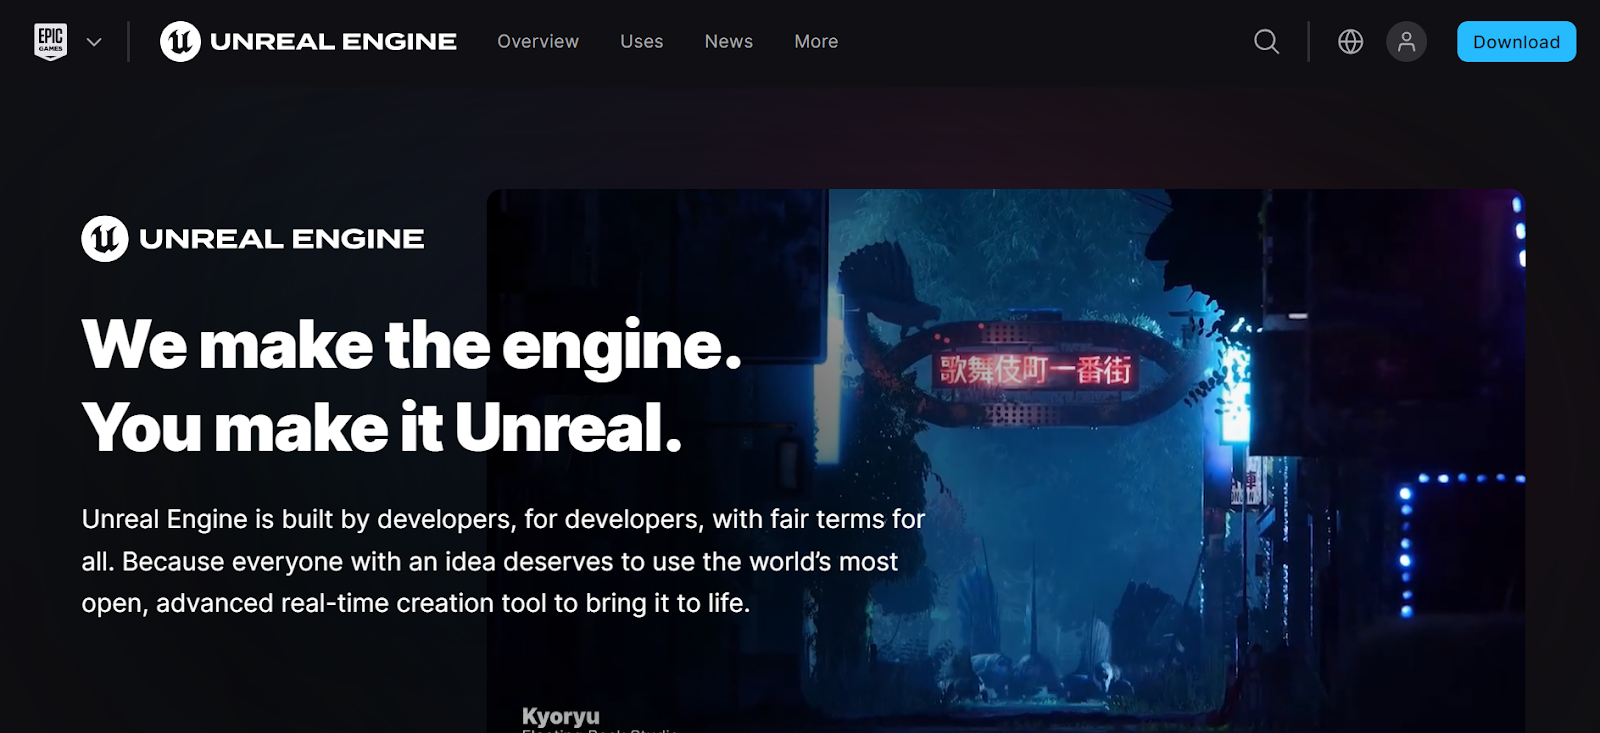 unreal engine motion graphics software